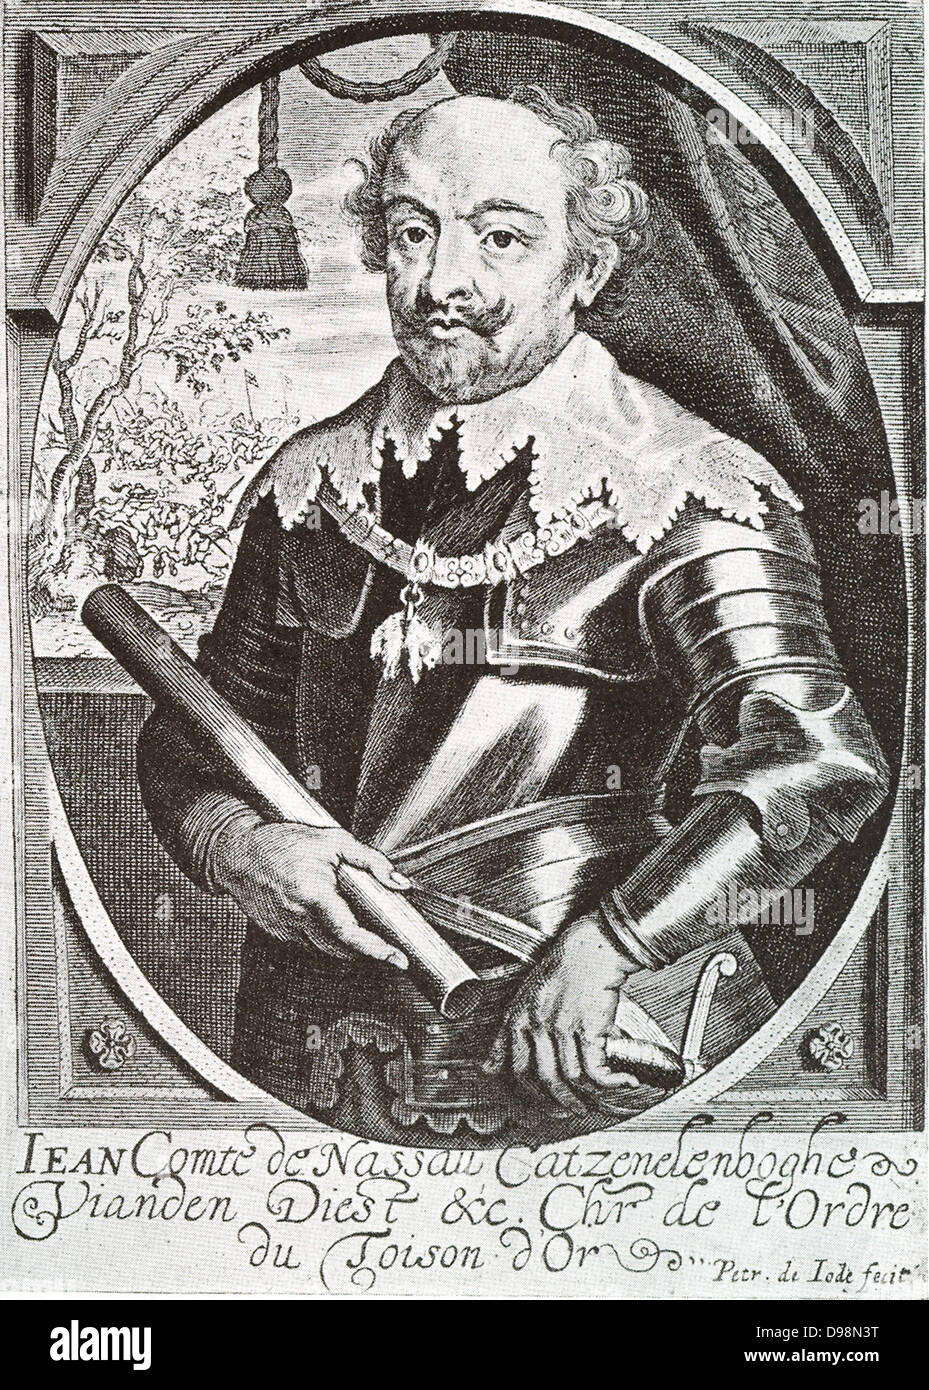 Count John VI of Nassau-Dillenburg (November 22, 1535, Dillenburg – October 8, 1606) was a Count of Nassau in Dillenburg, brother of William I of the Netherlands. He drew up the 1579 Union of Utrecht and was proclaimed governor of Gelderland  (1578-1580). Stock Photo